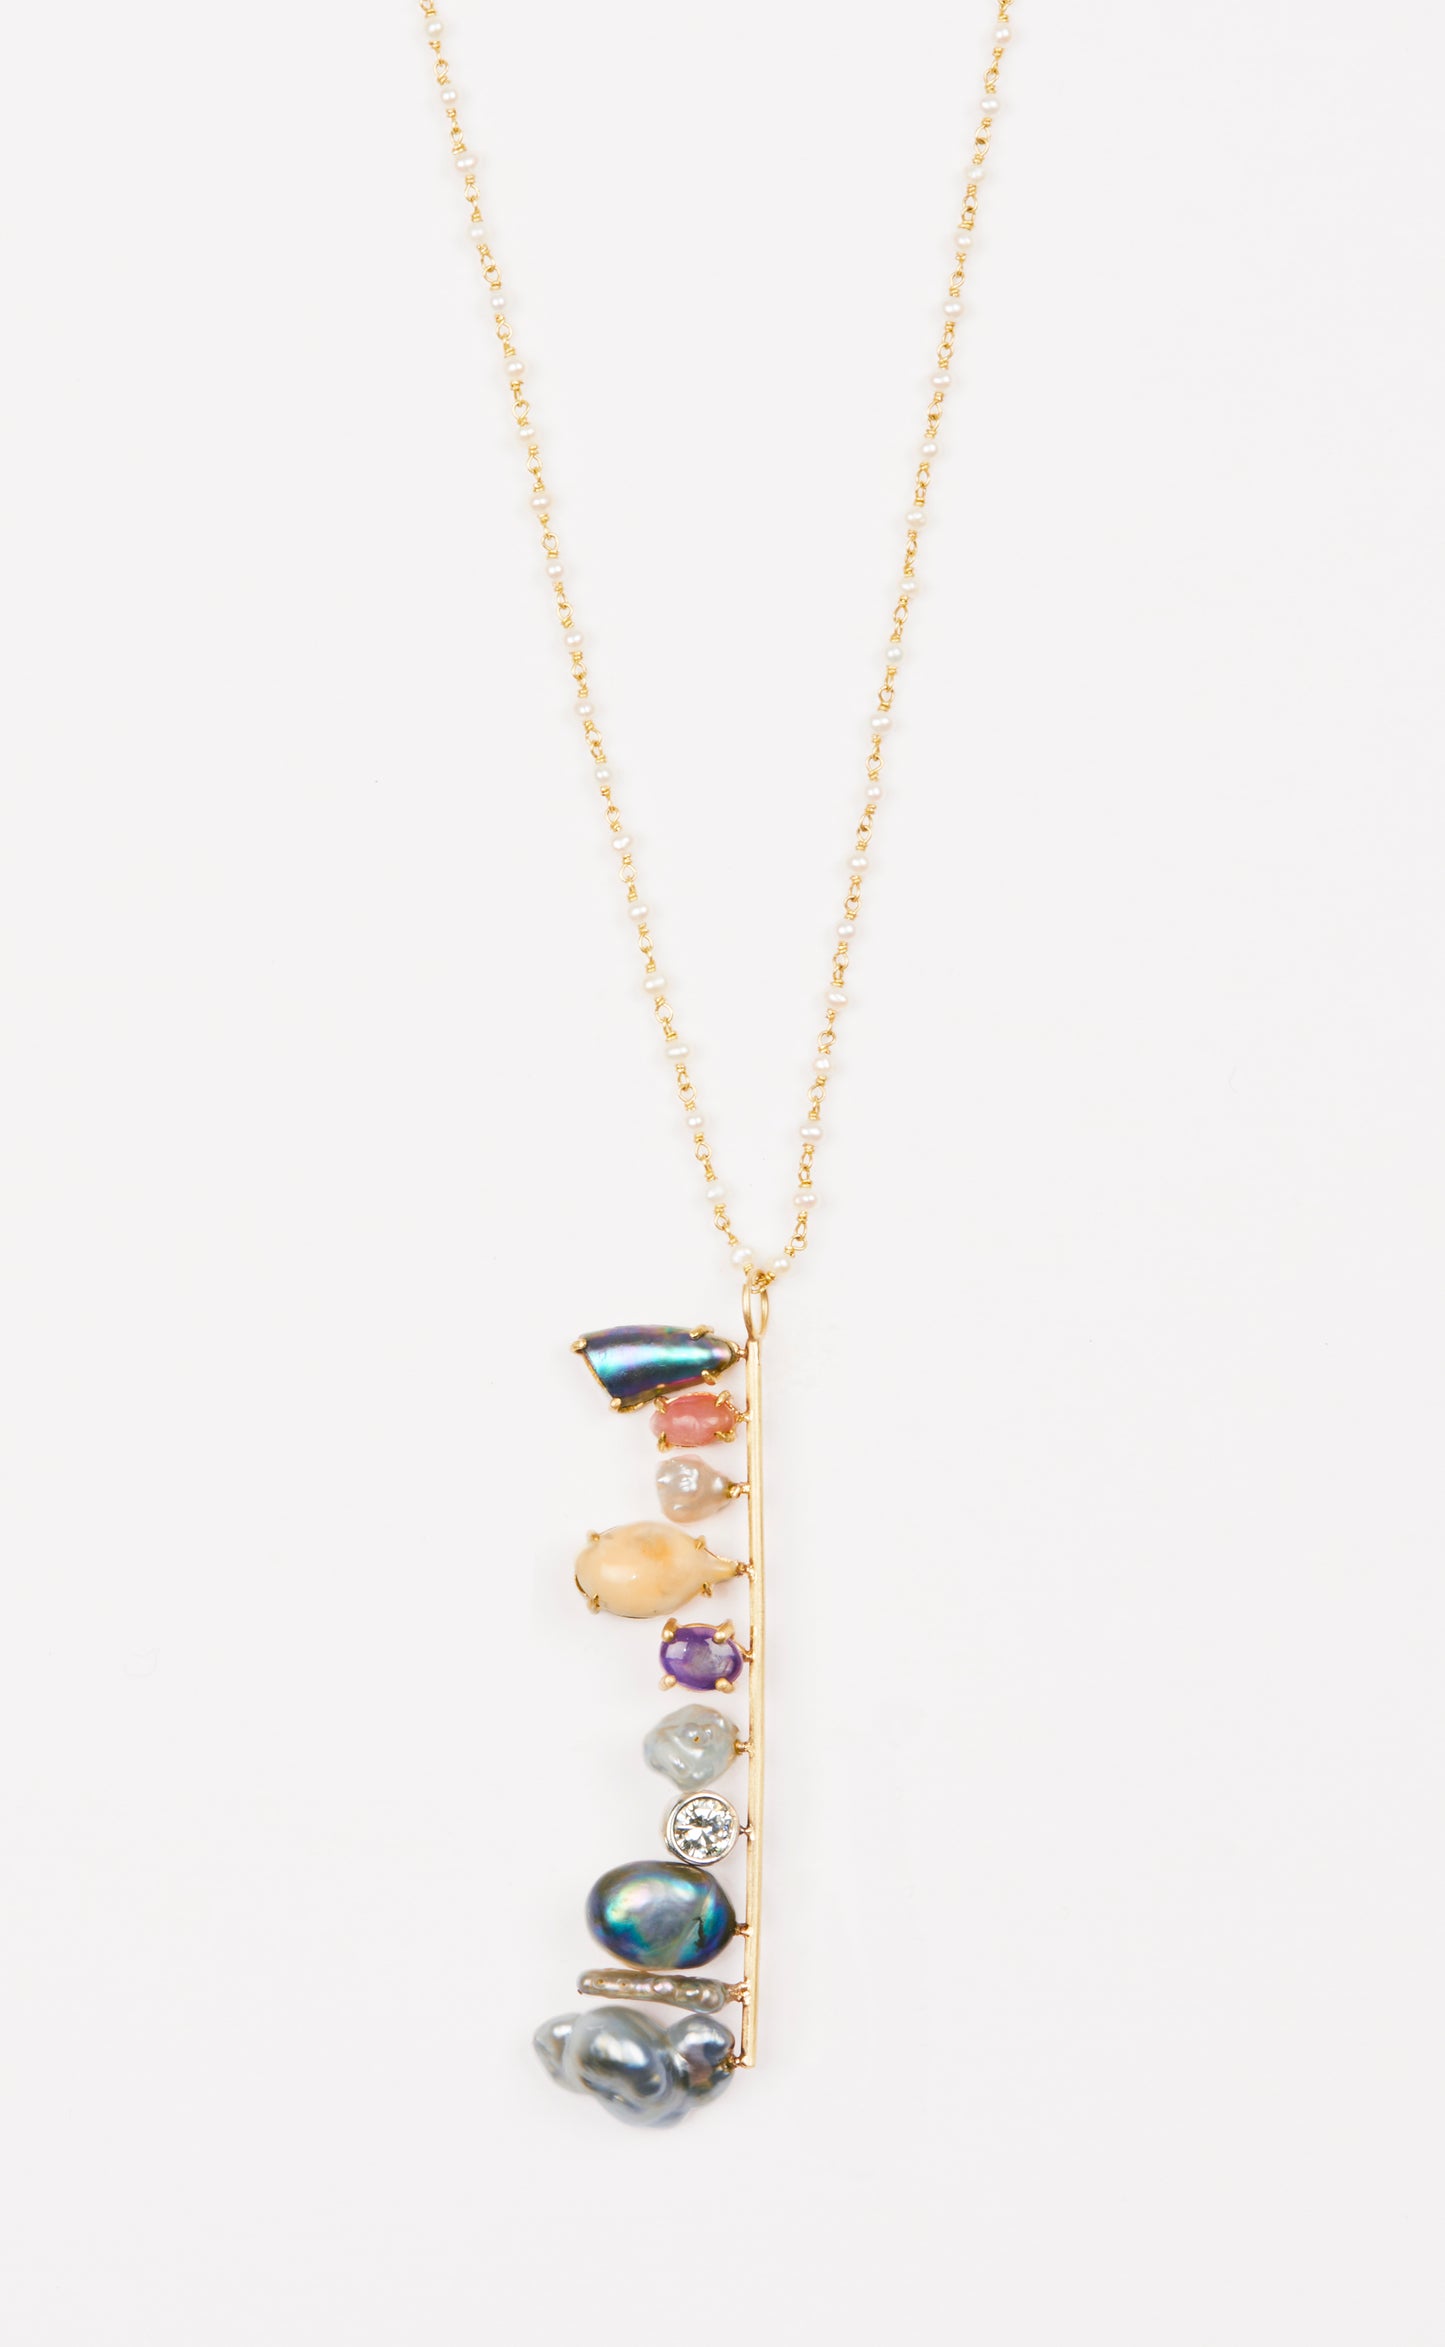 Conch, Diamond, Sapphire and Pearls on Pearl and Gold Chain